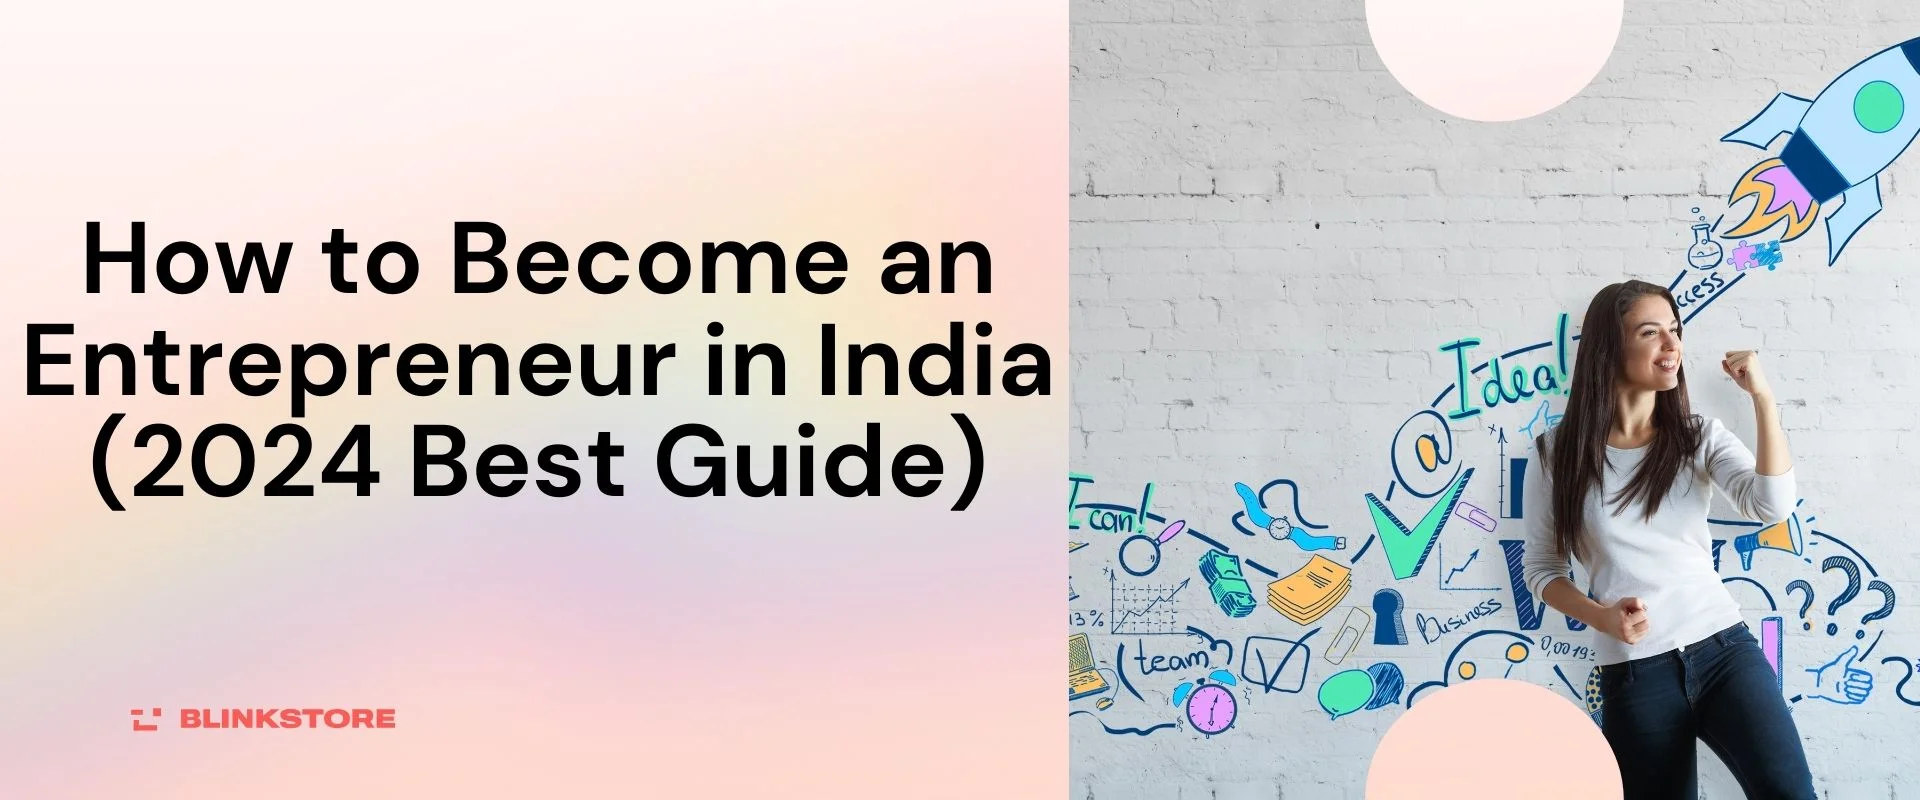 How to Become an Entrepreneur in India